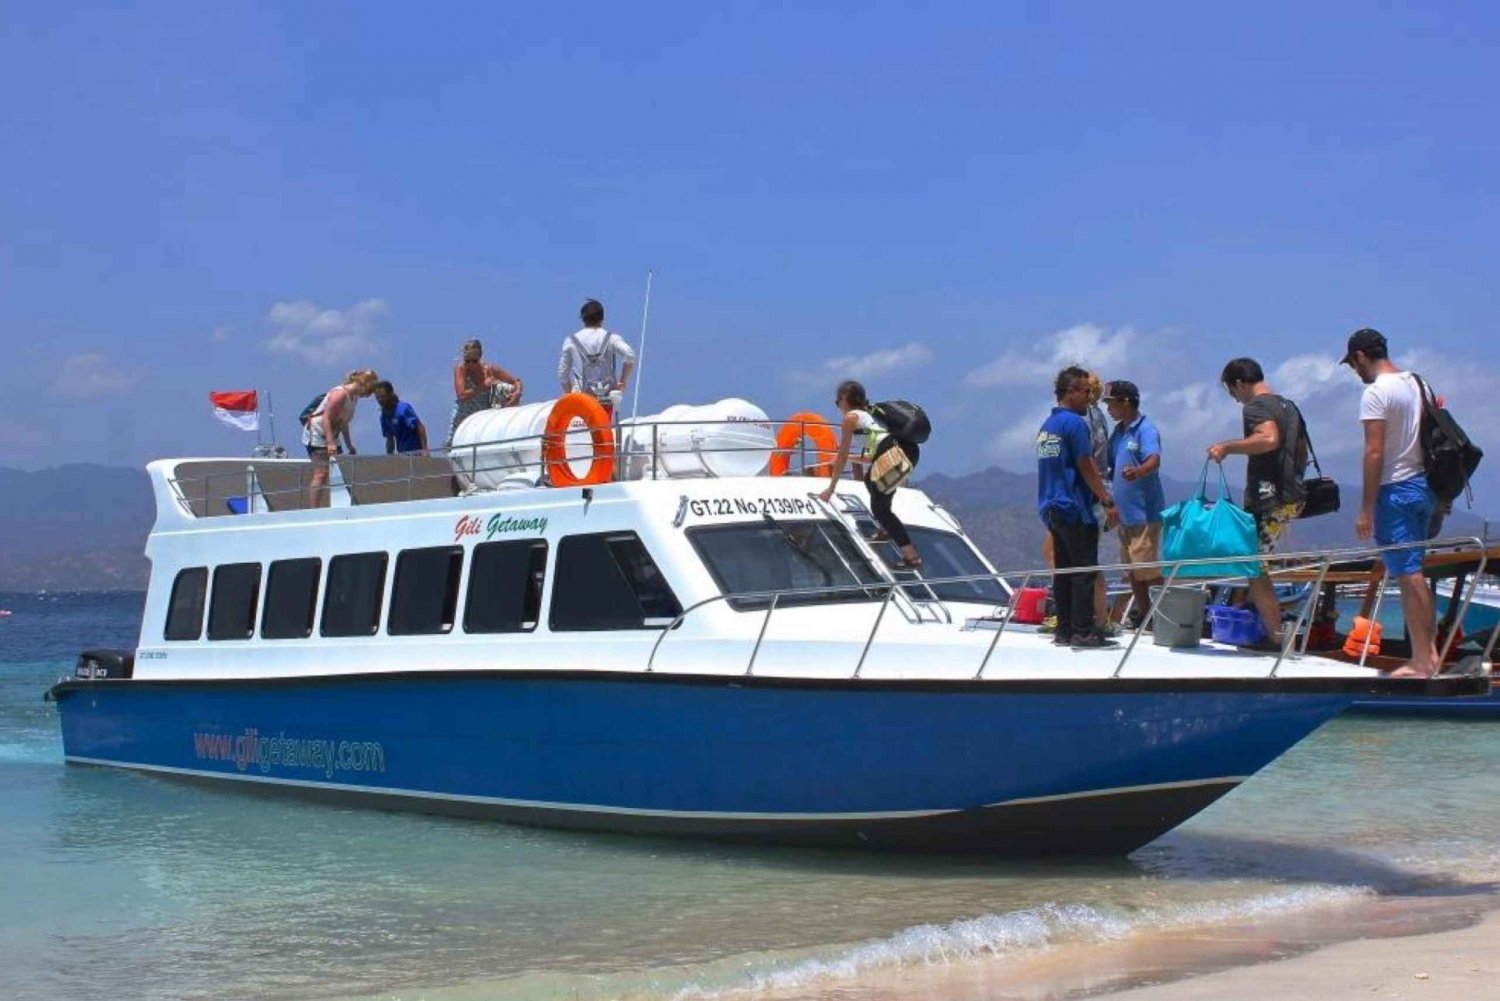 Bali to/from Gili Air: Fast Boat with Optional Bali Transfer